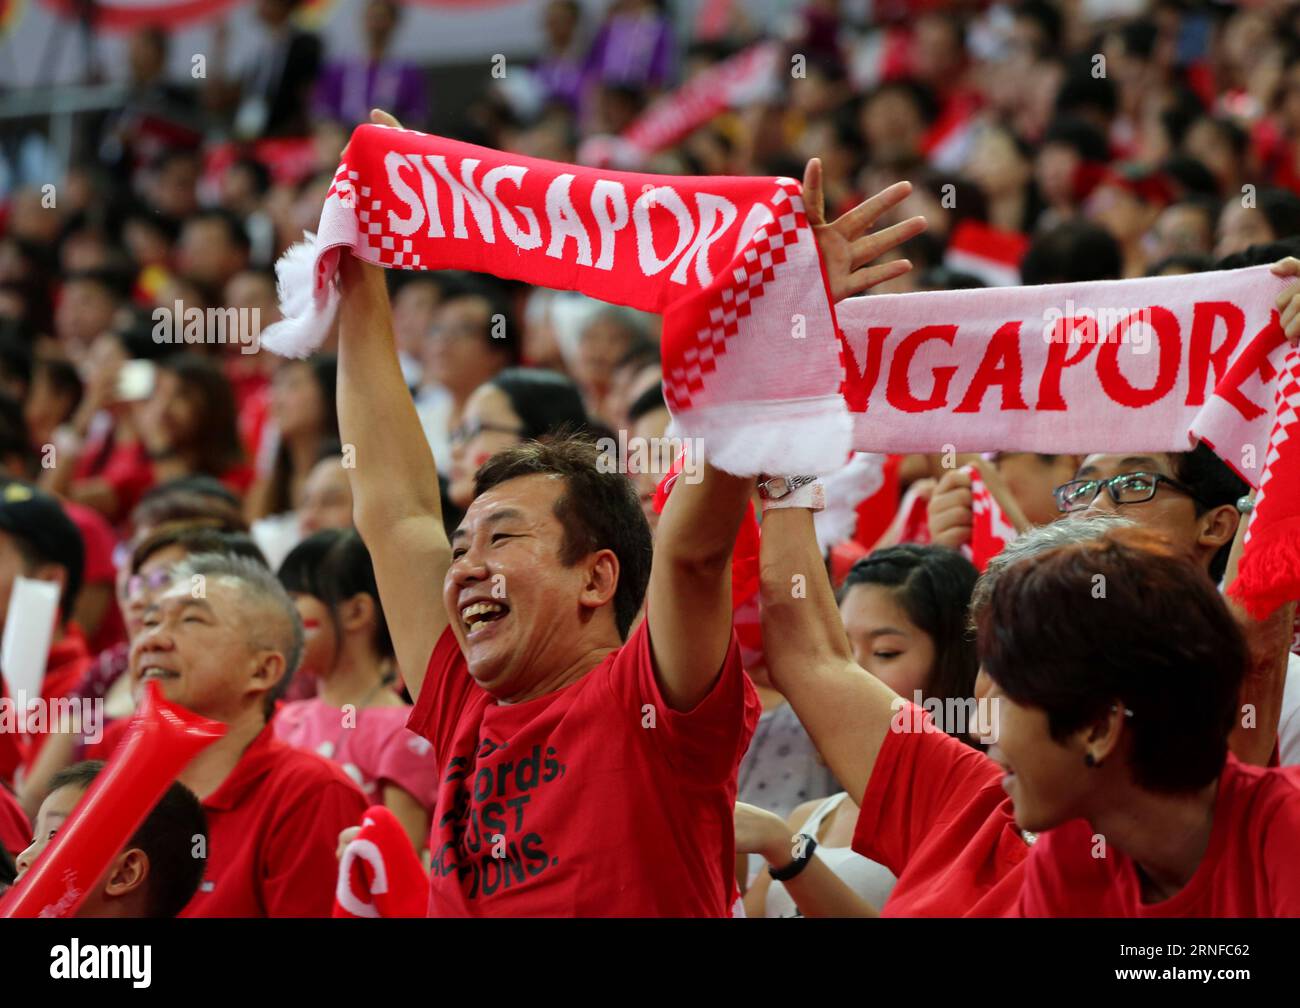 (160731) -- SINGAPORE, July 31, 2016 -- People watch Preview 2 of National Day Parade at the Singapore National Stadium, July 30, 2016. Singapore will celebrate the 51st anniversary of its independence on August 9. )(yy) SINGAPORE-NATIONAL DAY PARADE-PREVIEW BaoxXuelin PUBLICATIONxNOTxINxCHN   Singapore July 31 2016 Celebrities Watch Preview 2 of National Day Parade AT The Singapore National Stage July 30 2016 Singapore will Celebrate The 51st Anniversary of its Independence ON August 9 yy Singapore National Day Parade Preview BaoxXuelin PUBLICATIONxNOTxINxCHN Stock Photo